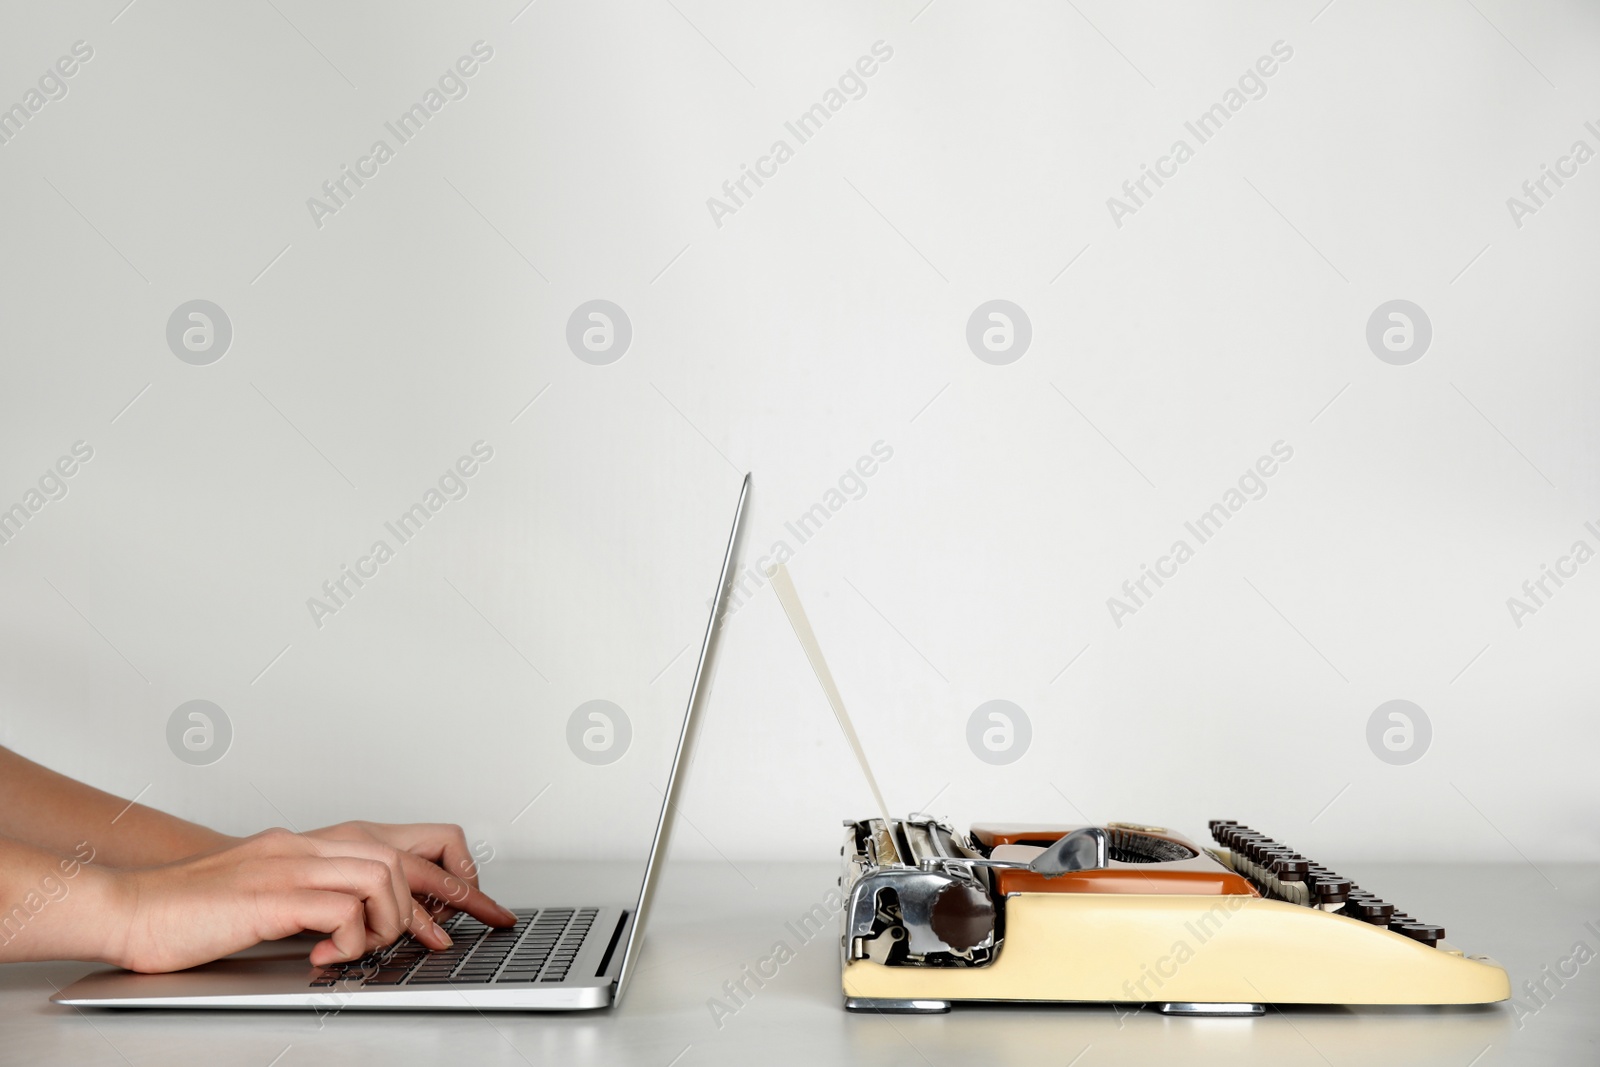 Photo of Woman using laptop near old typewriter at table against light background, closeup with space for text. Concept of technology progress